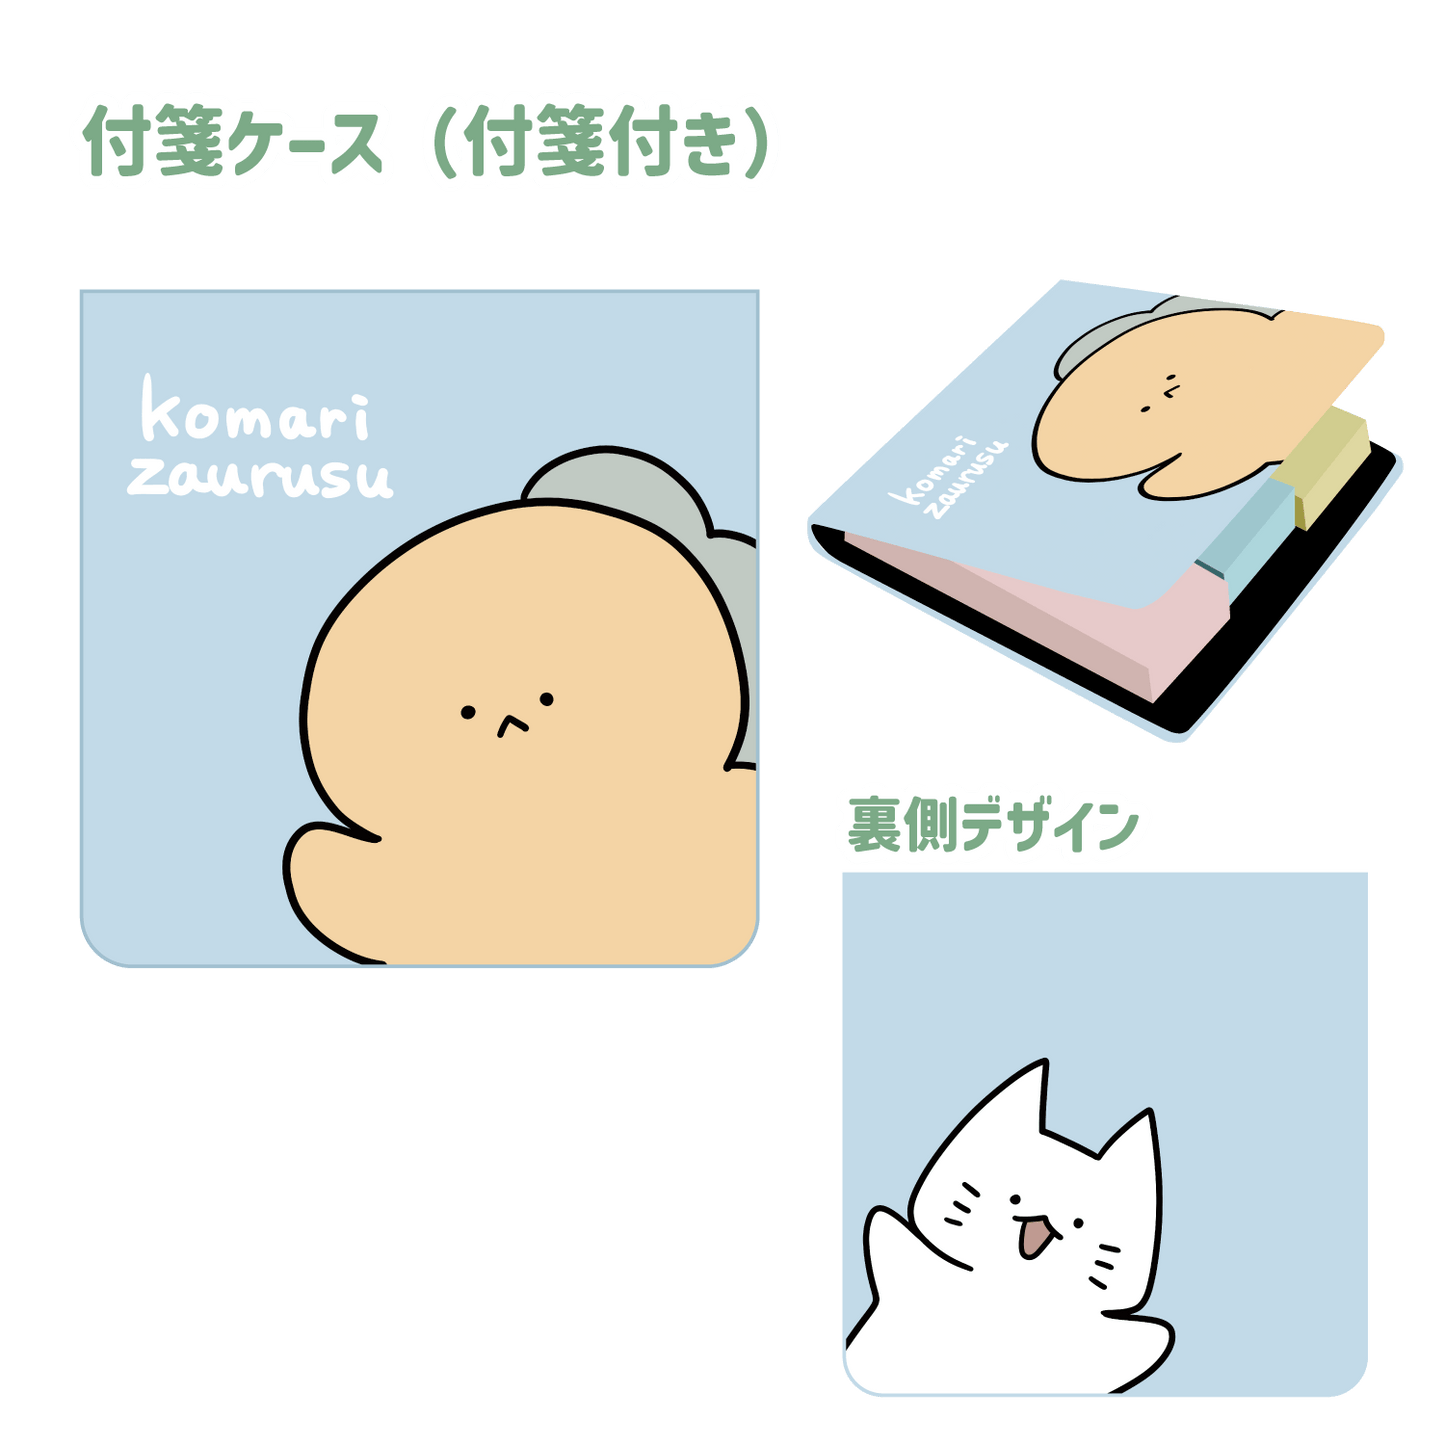 [Troublesome Zaurus] Sticky note case [Shipped in mid-July]